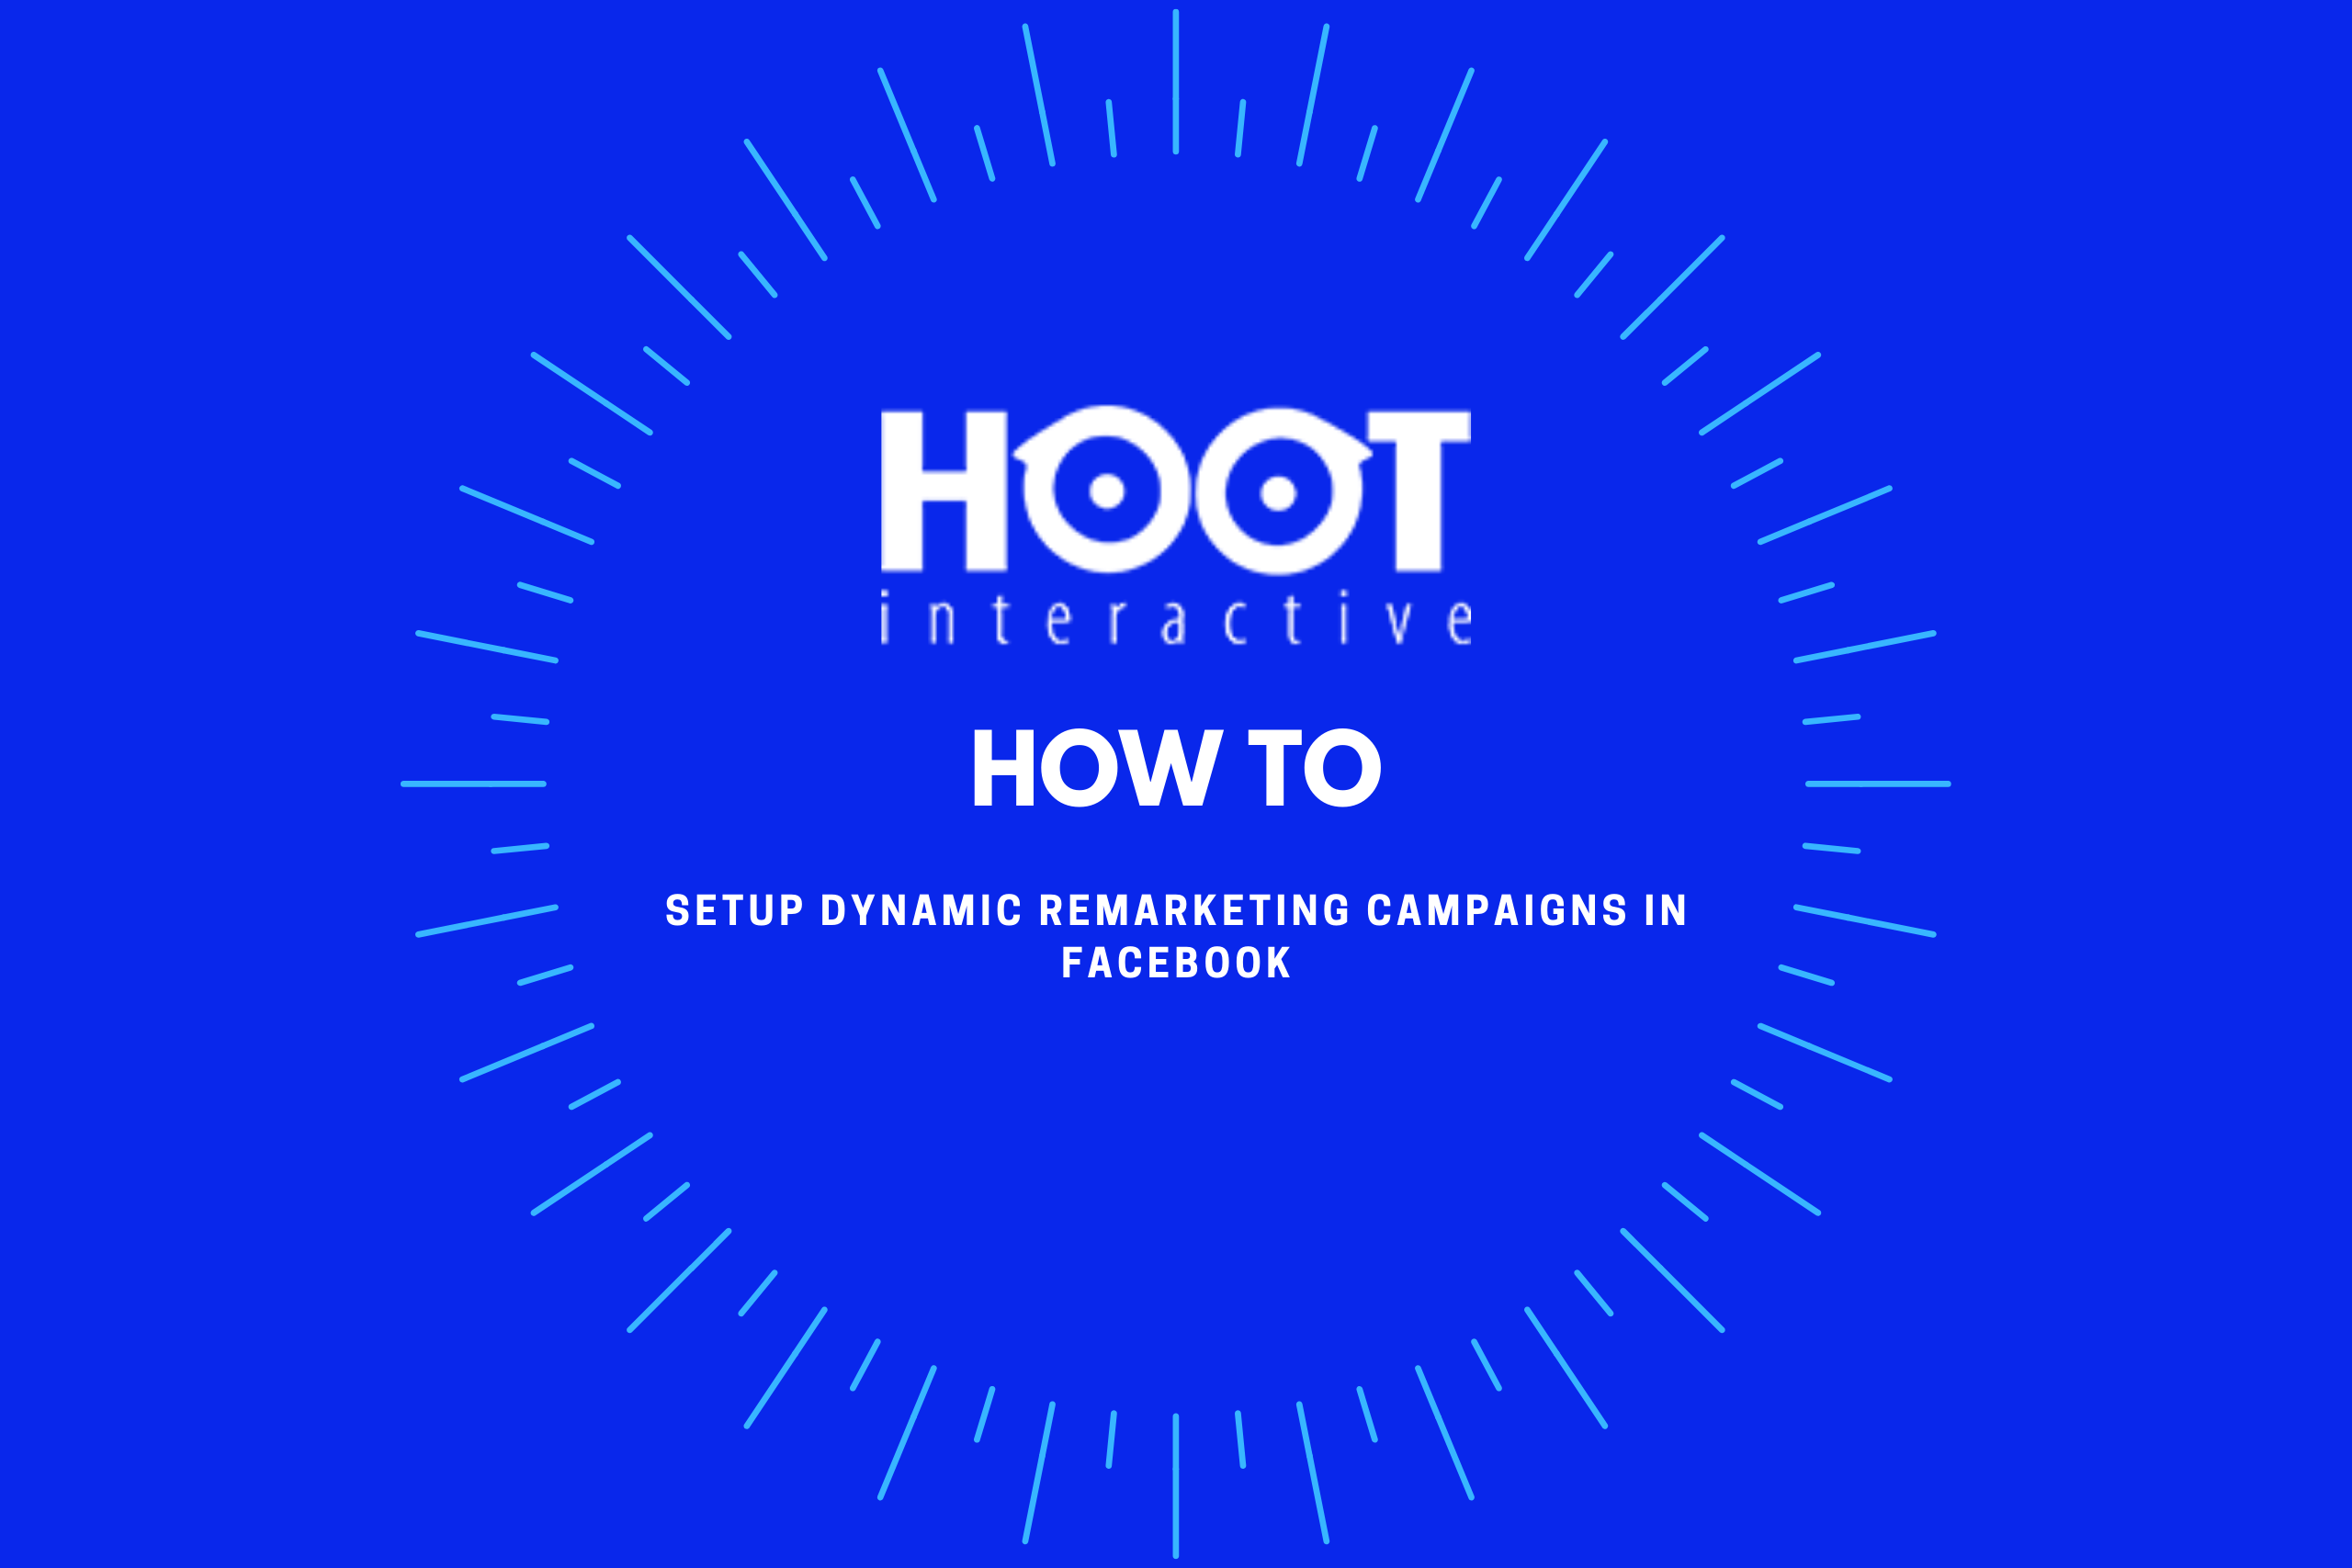 Hoot How To: Setup Dynamic Remarketing Campaigns in Facebook